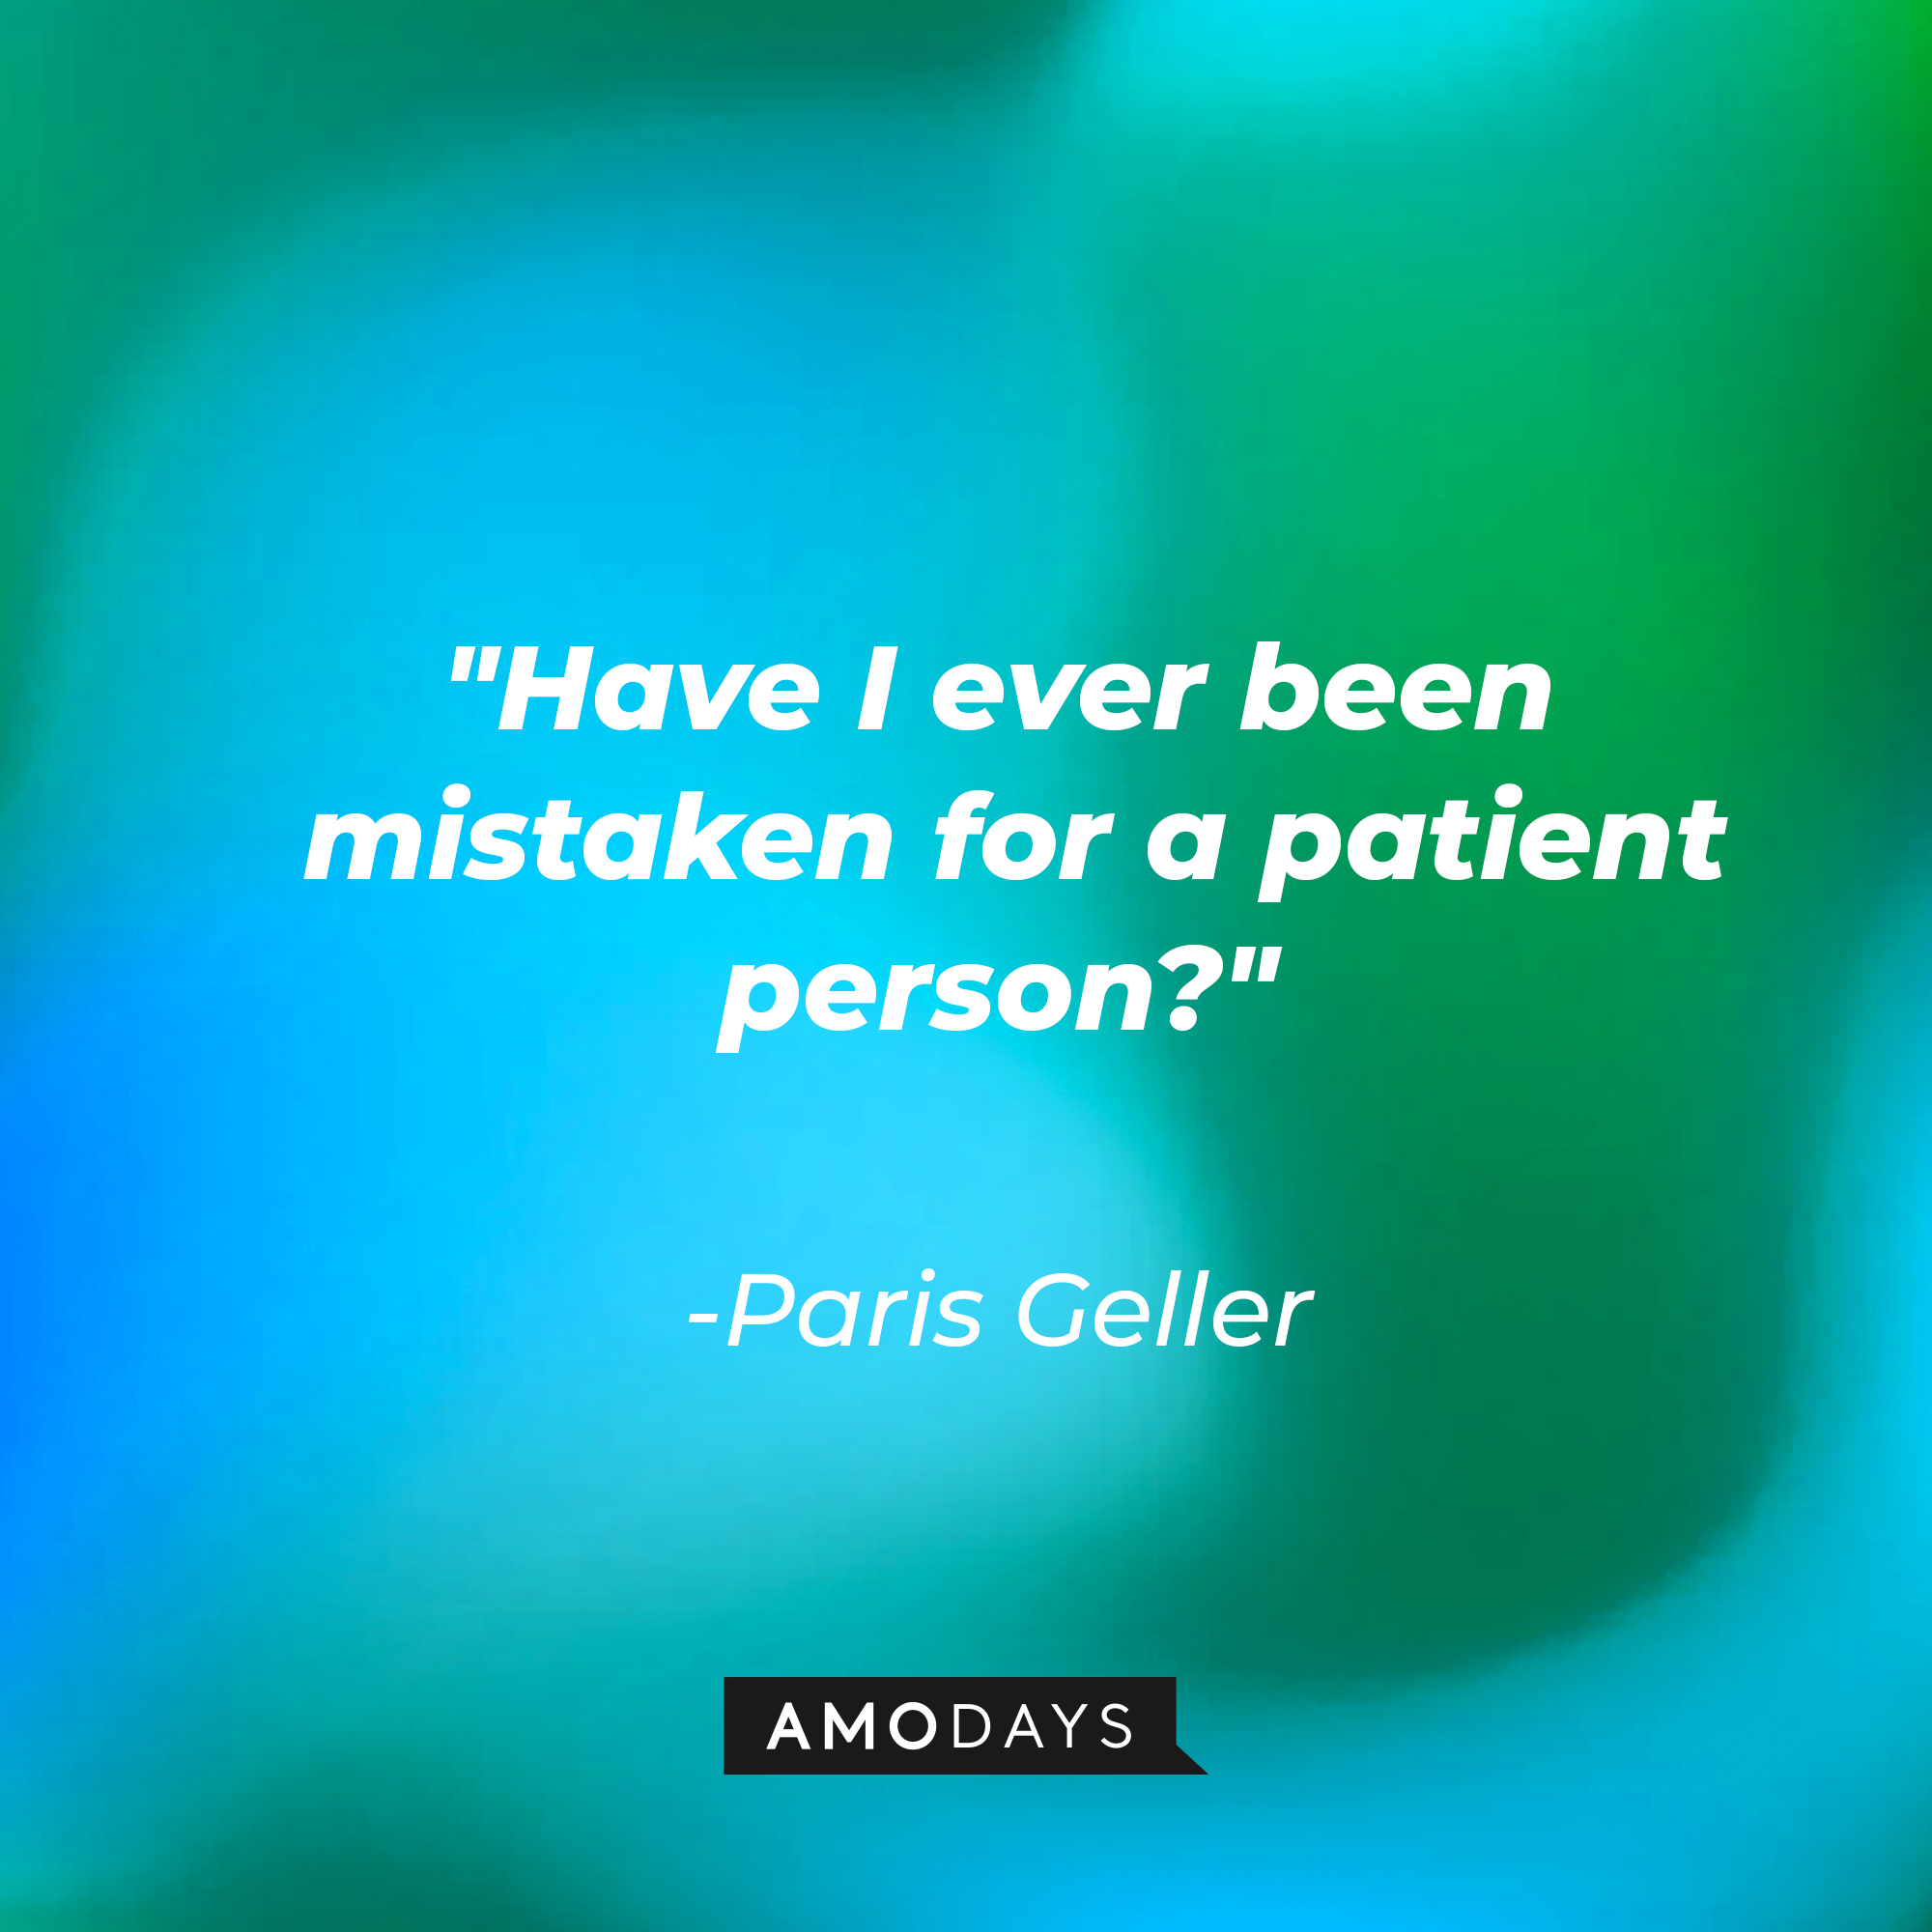 Paris Geller’s quote: “Have I ever been mistaken for a patient person?” | Source: AmoDays